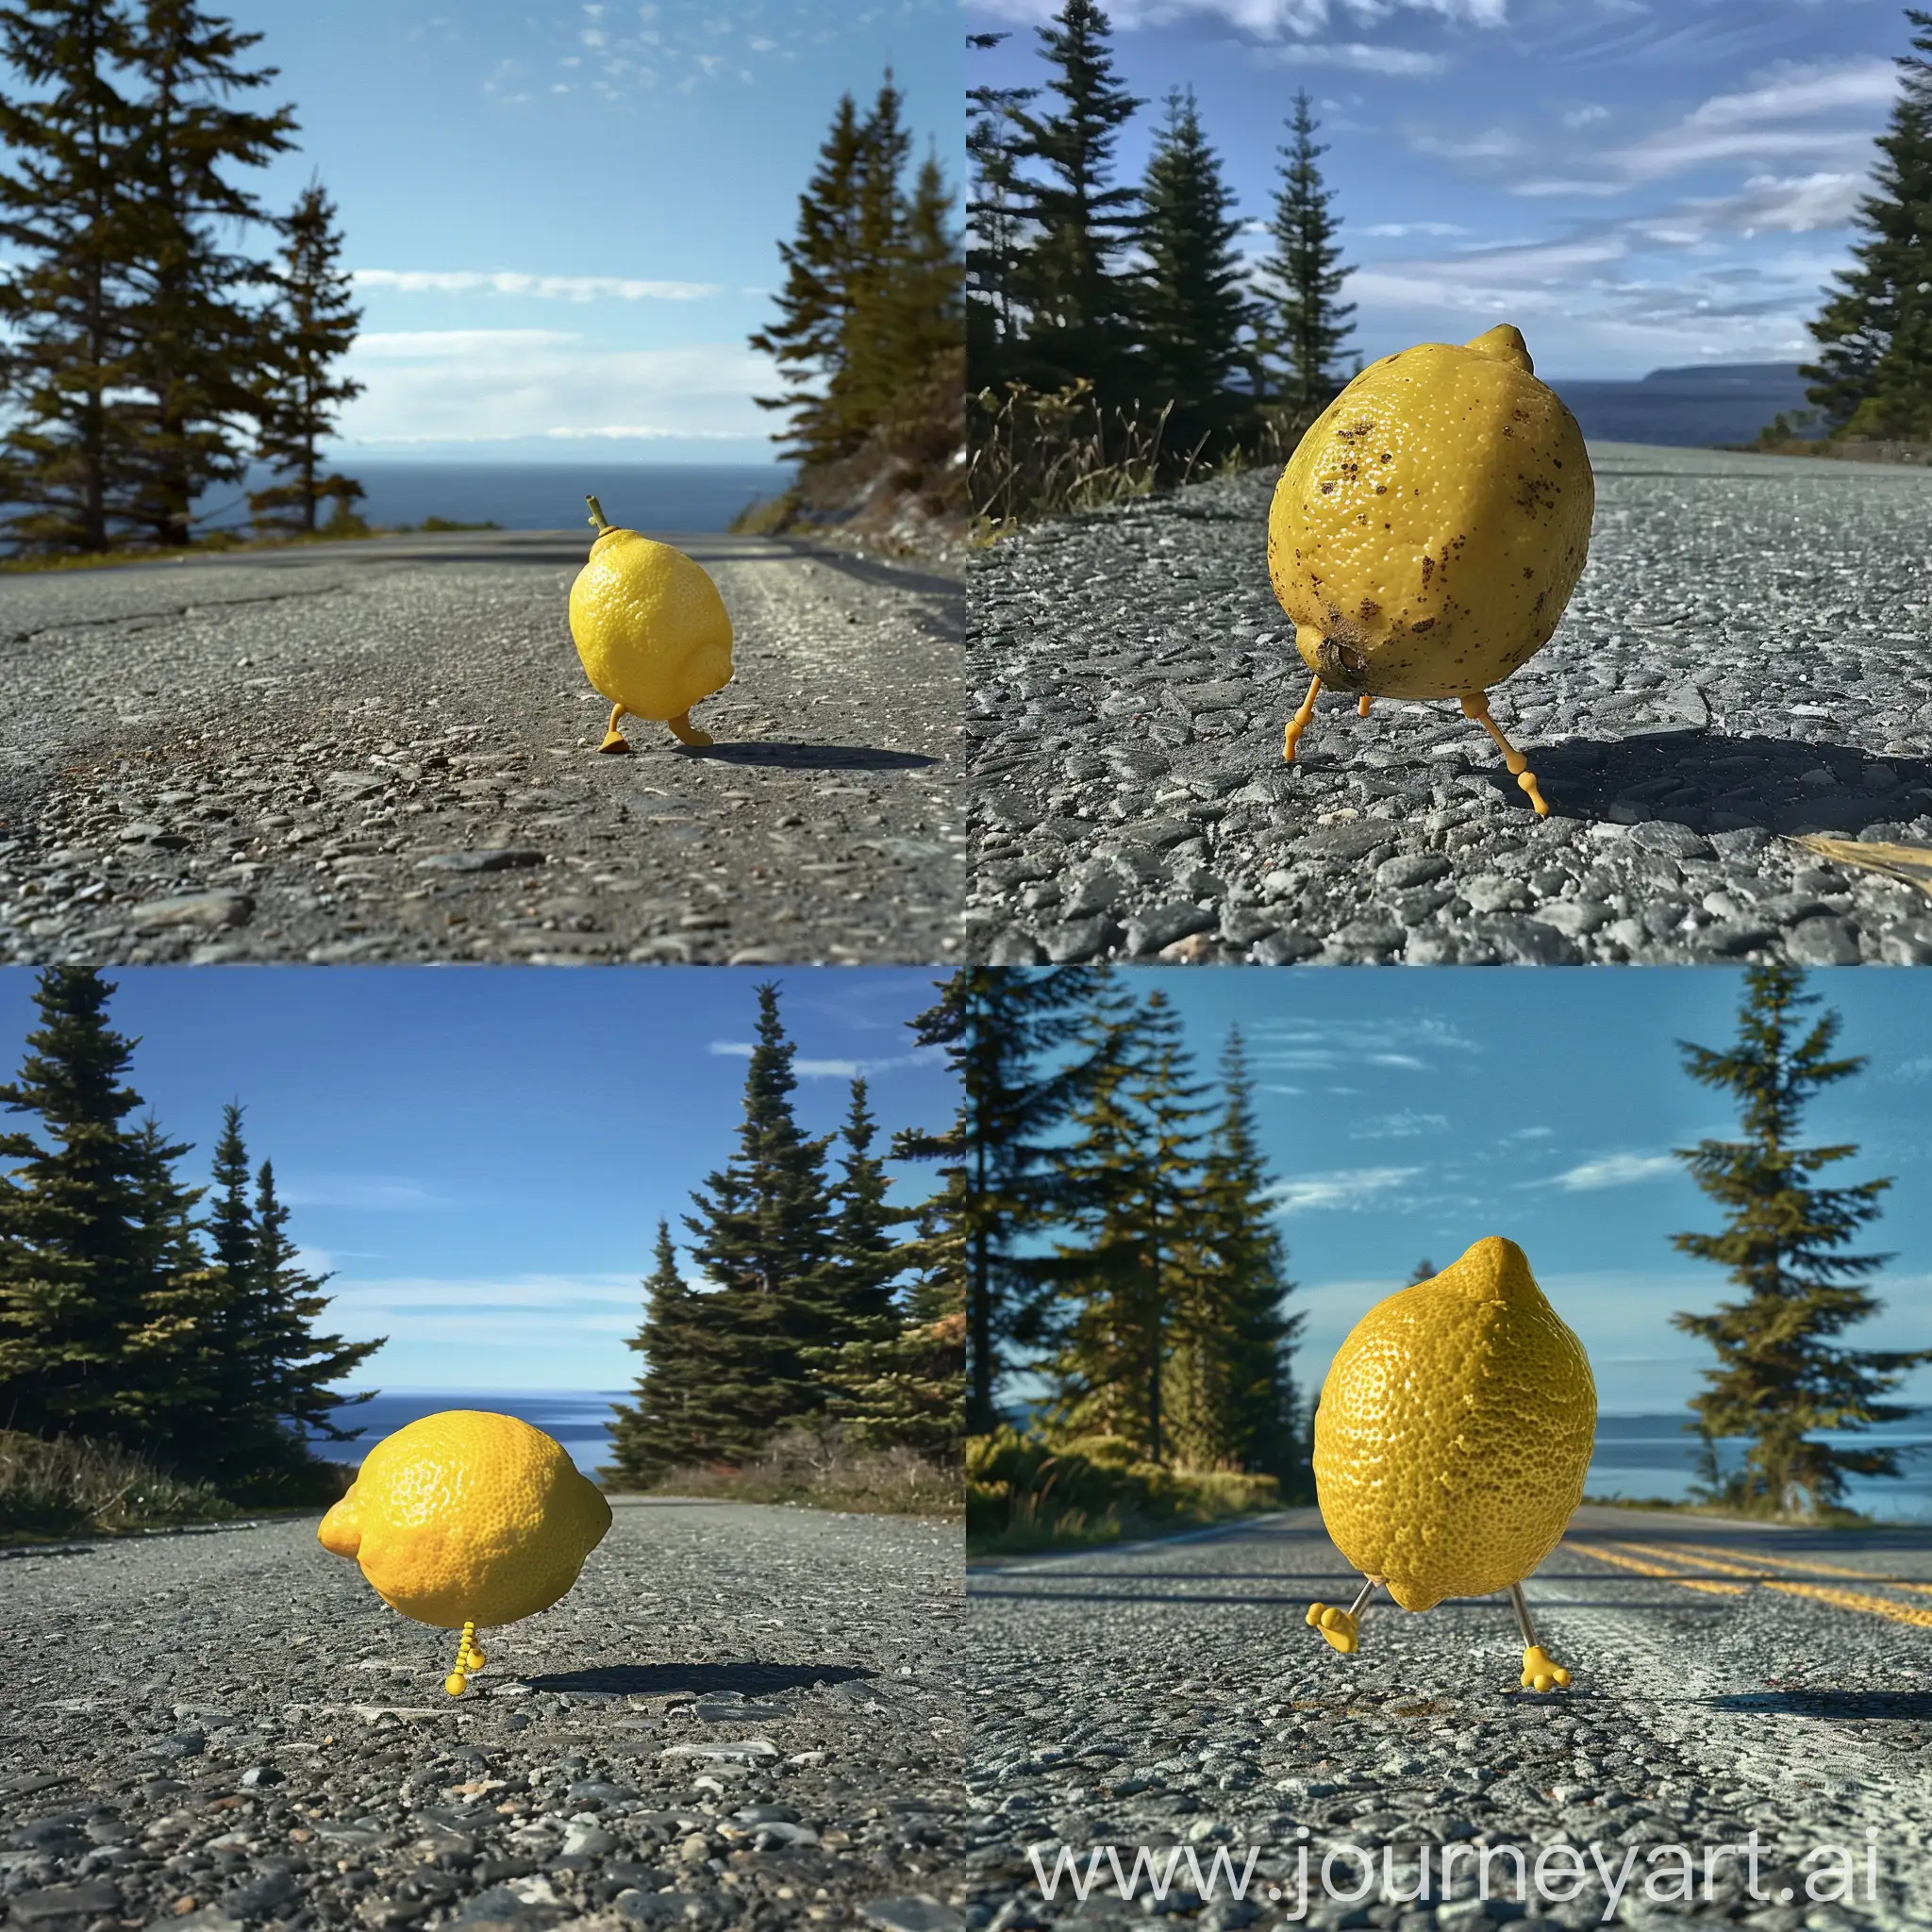 Lively-Lemon-Hopping-Along-Gravel-Road-with-Fir-Trees-and-Sea-Background